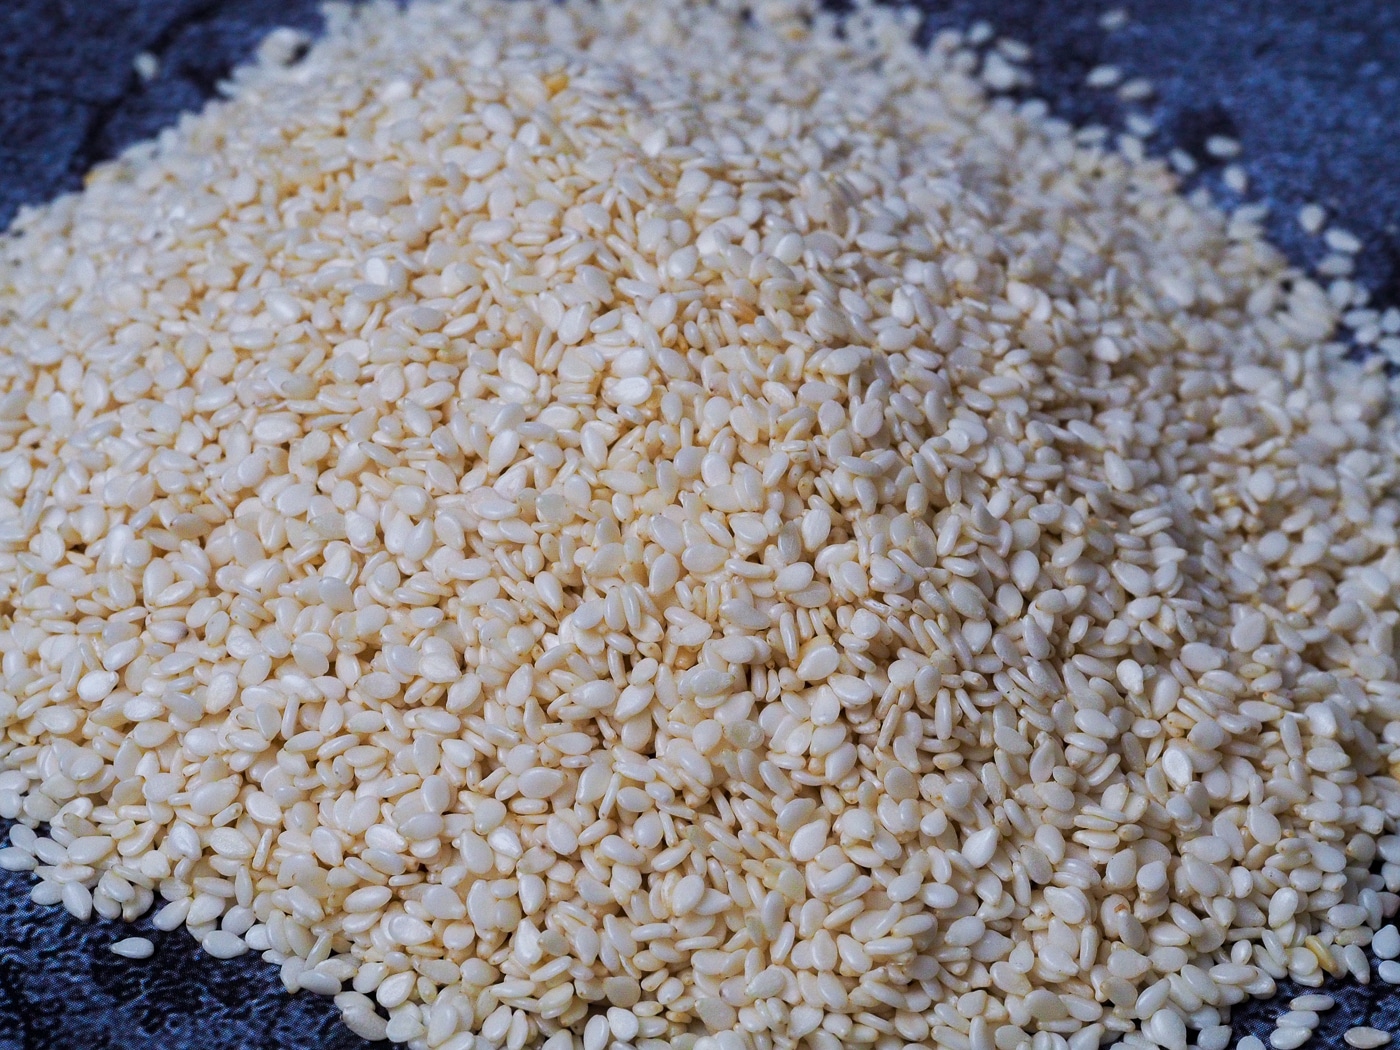 A pile of raw white sesame seeds